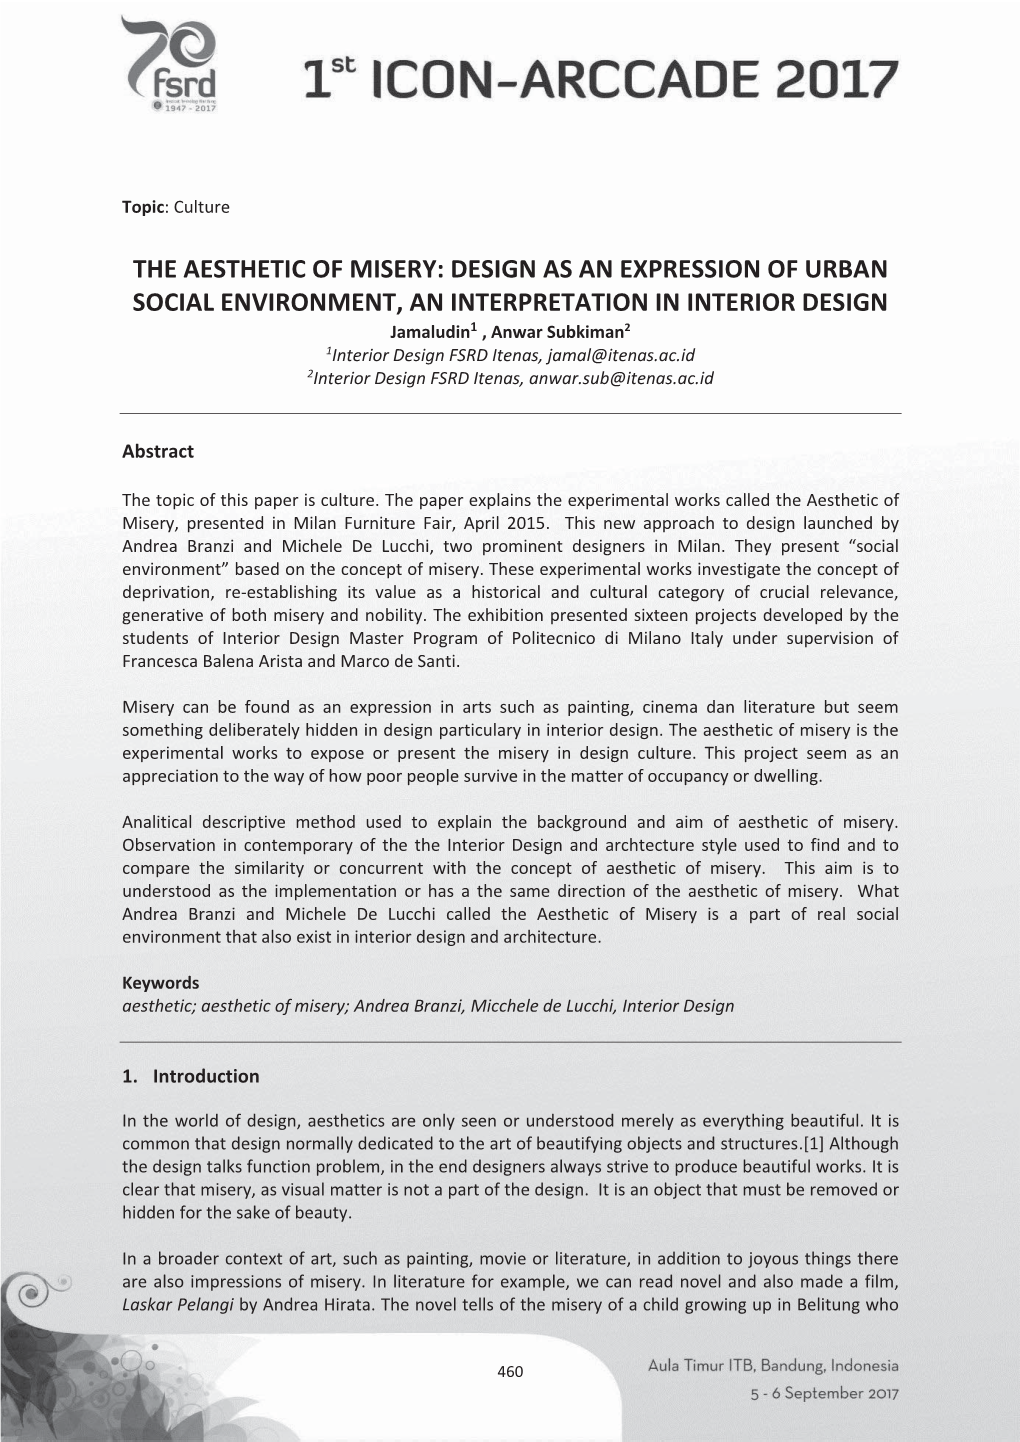 The Aesthetic of Misery: Design As an Expression of Urban Social Environment, an Interpretation in Interior Design